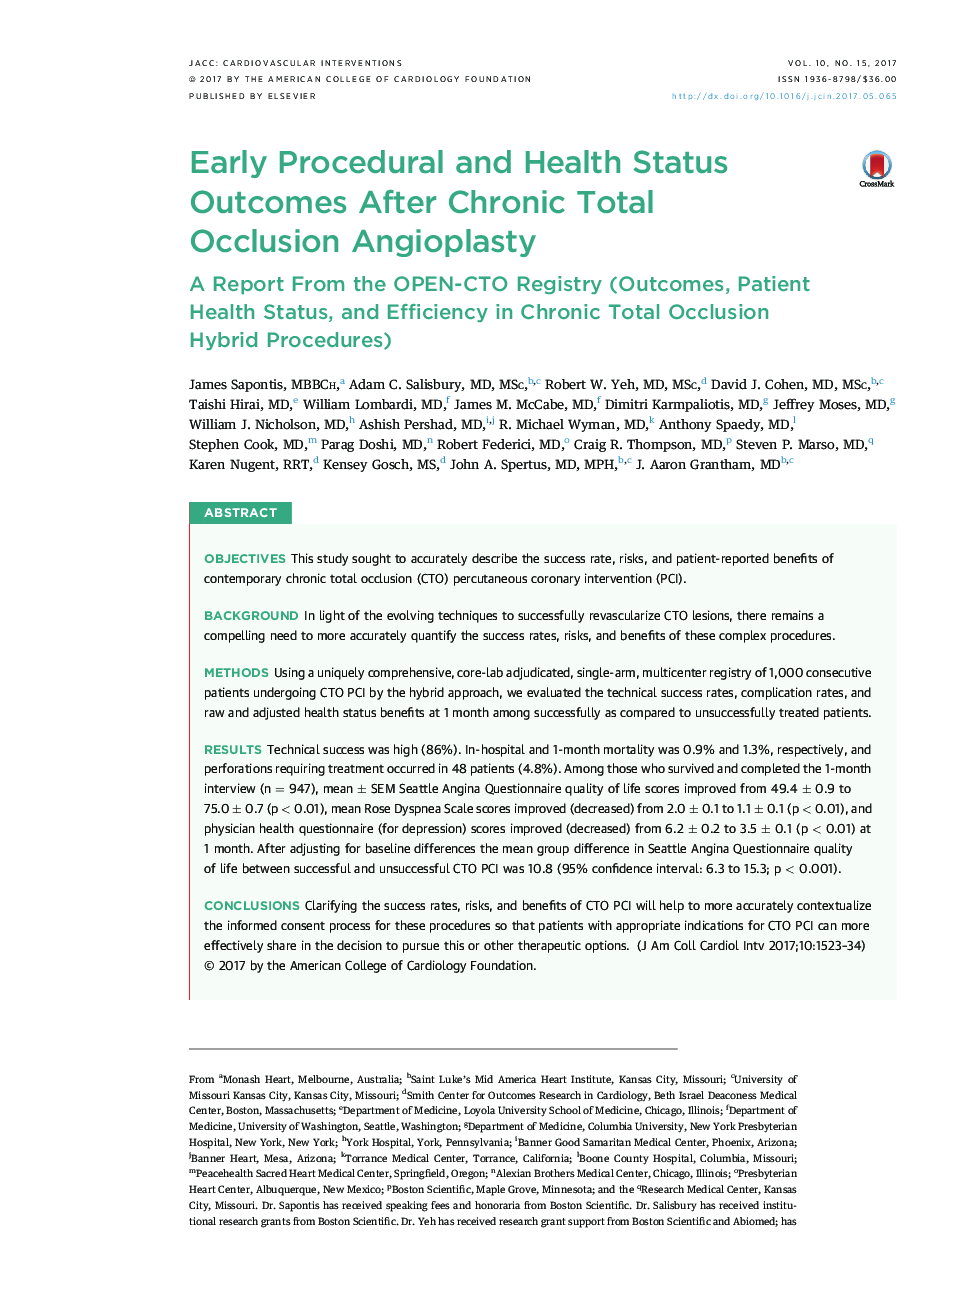 Early Procedural and Health Status Outcomes After Chronic Total OcclusionÂ Angioplasty